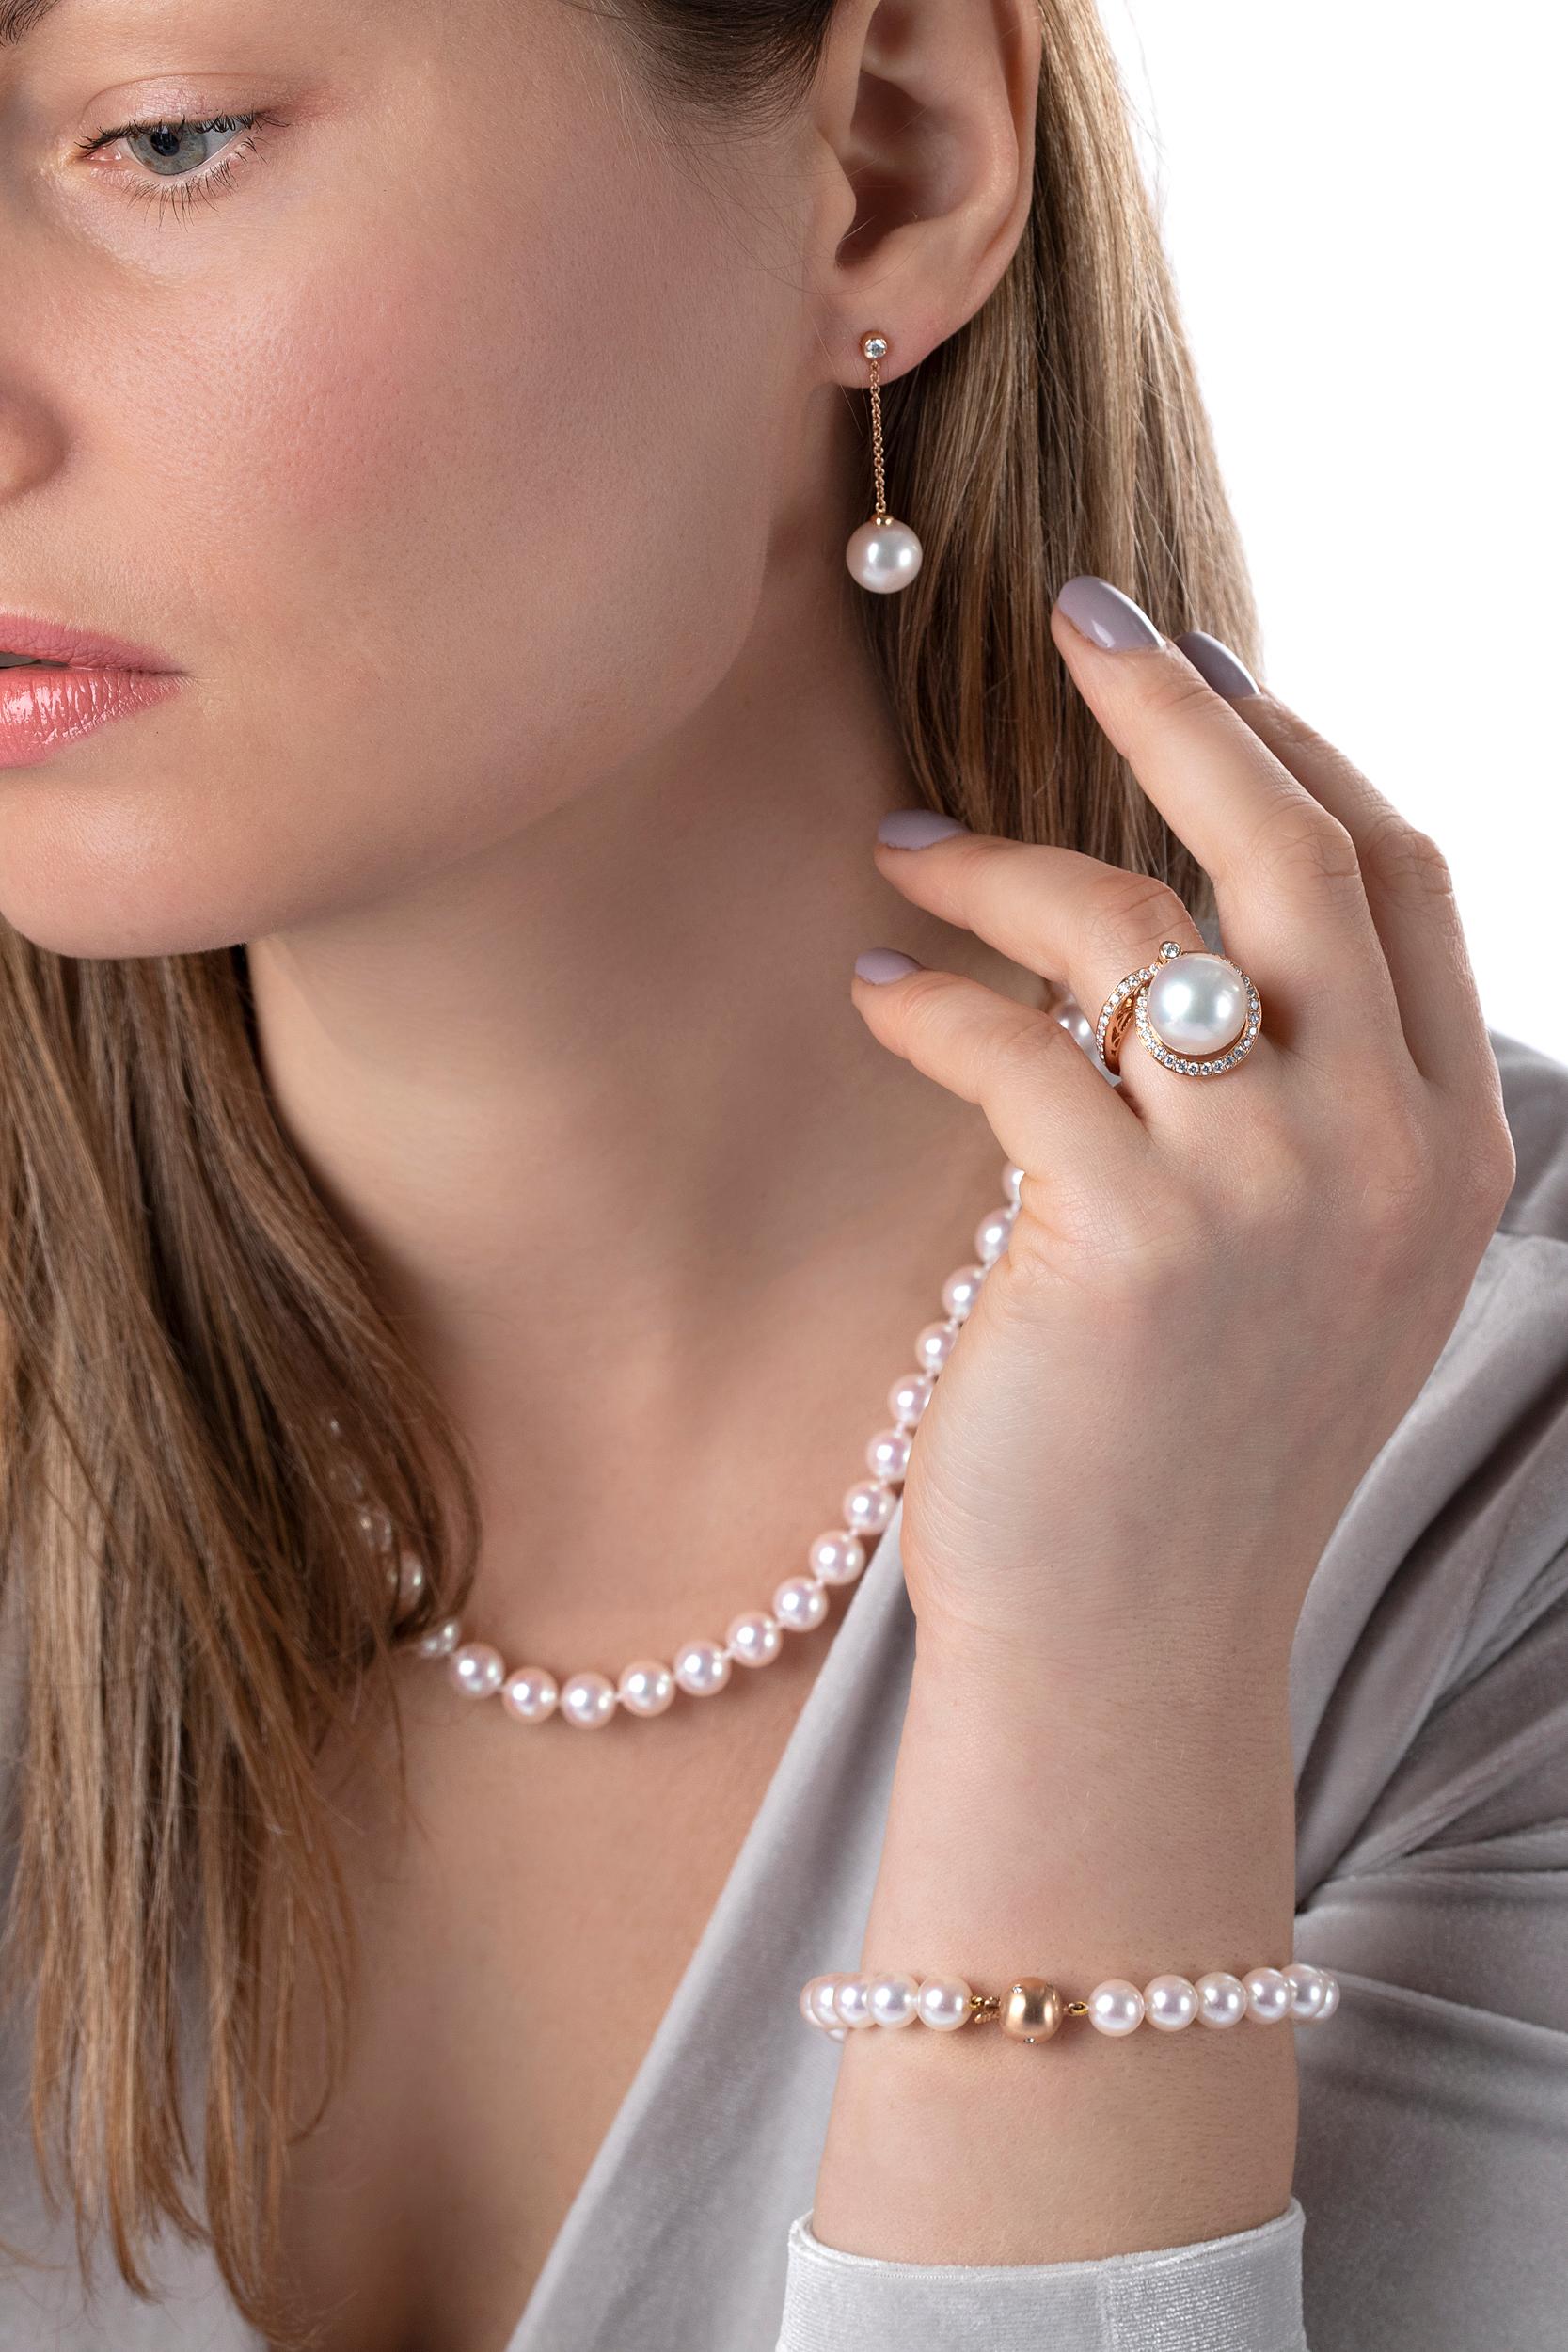 These elegant earrings feature lustrous, high-quality Freshwater pearls, accentuated by an 18K rose gold chain and scintillating solitaire diamonds. A contemporary way to wear pearls, these striking earrings will elevate any outfit. Secured with a